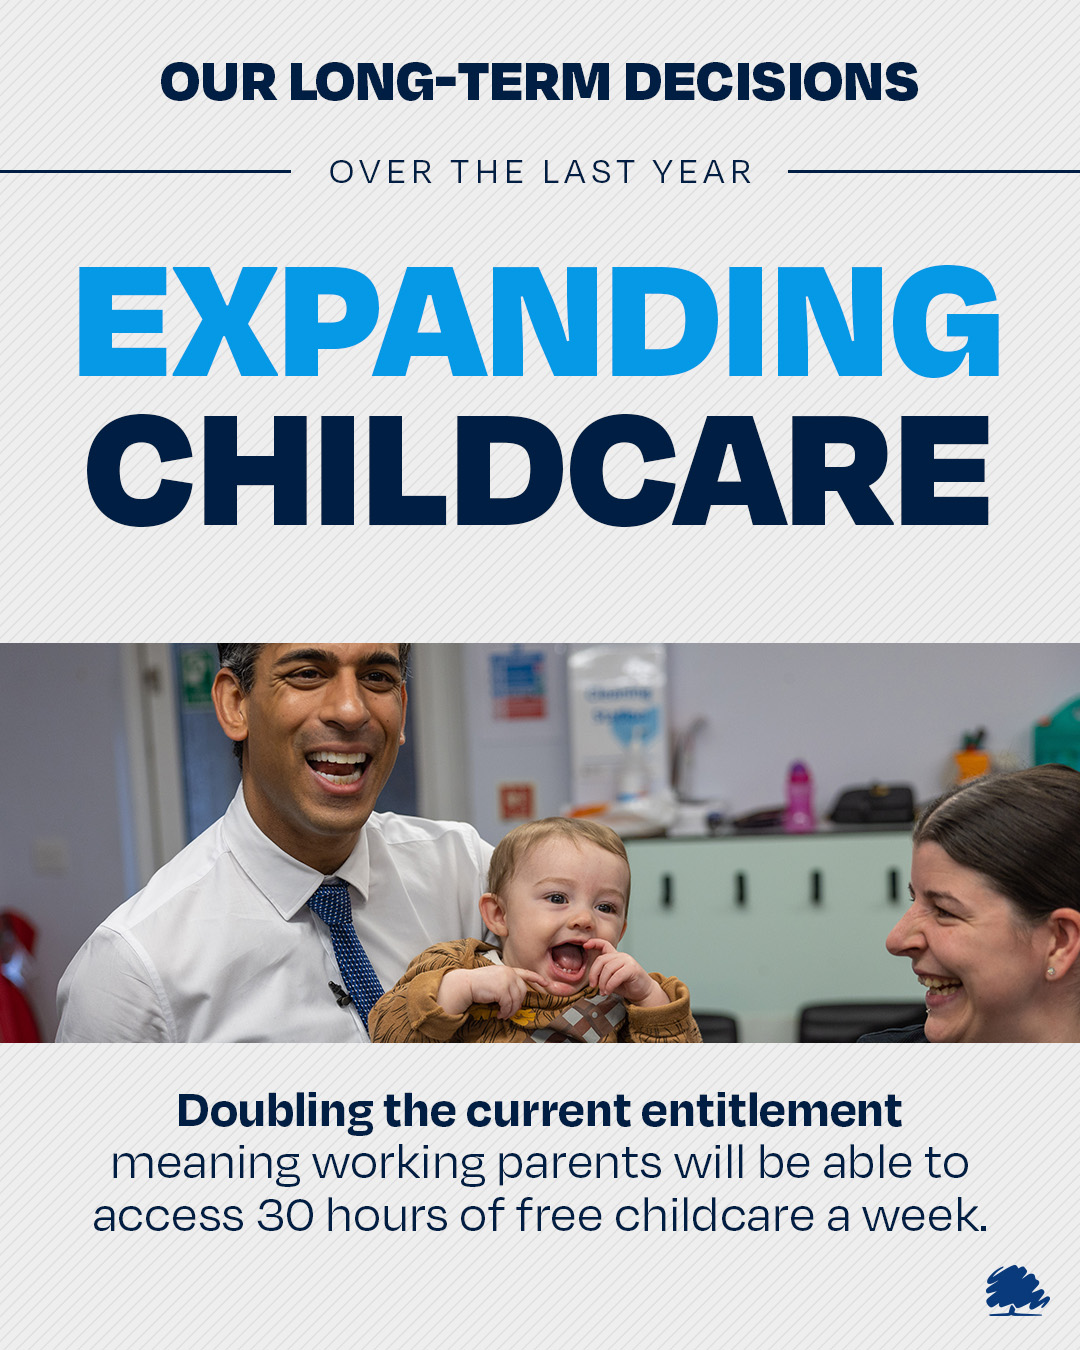 Expanding childcare